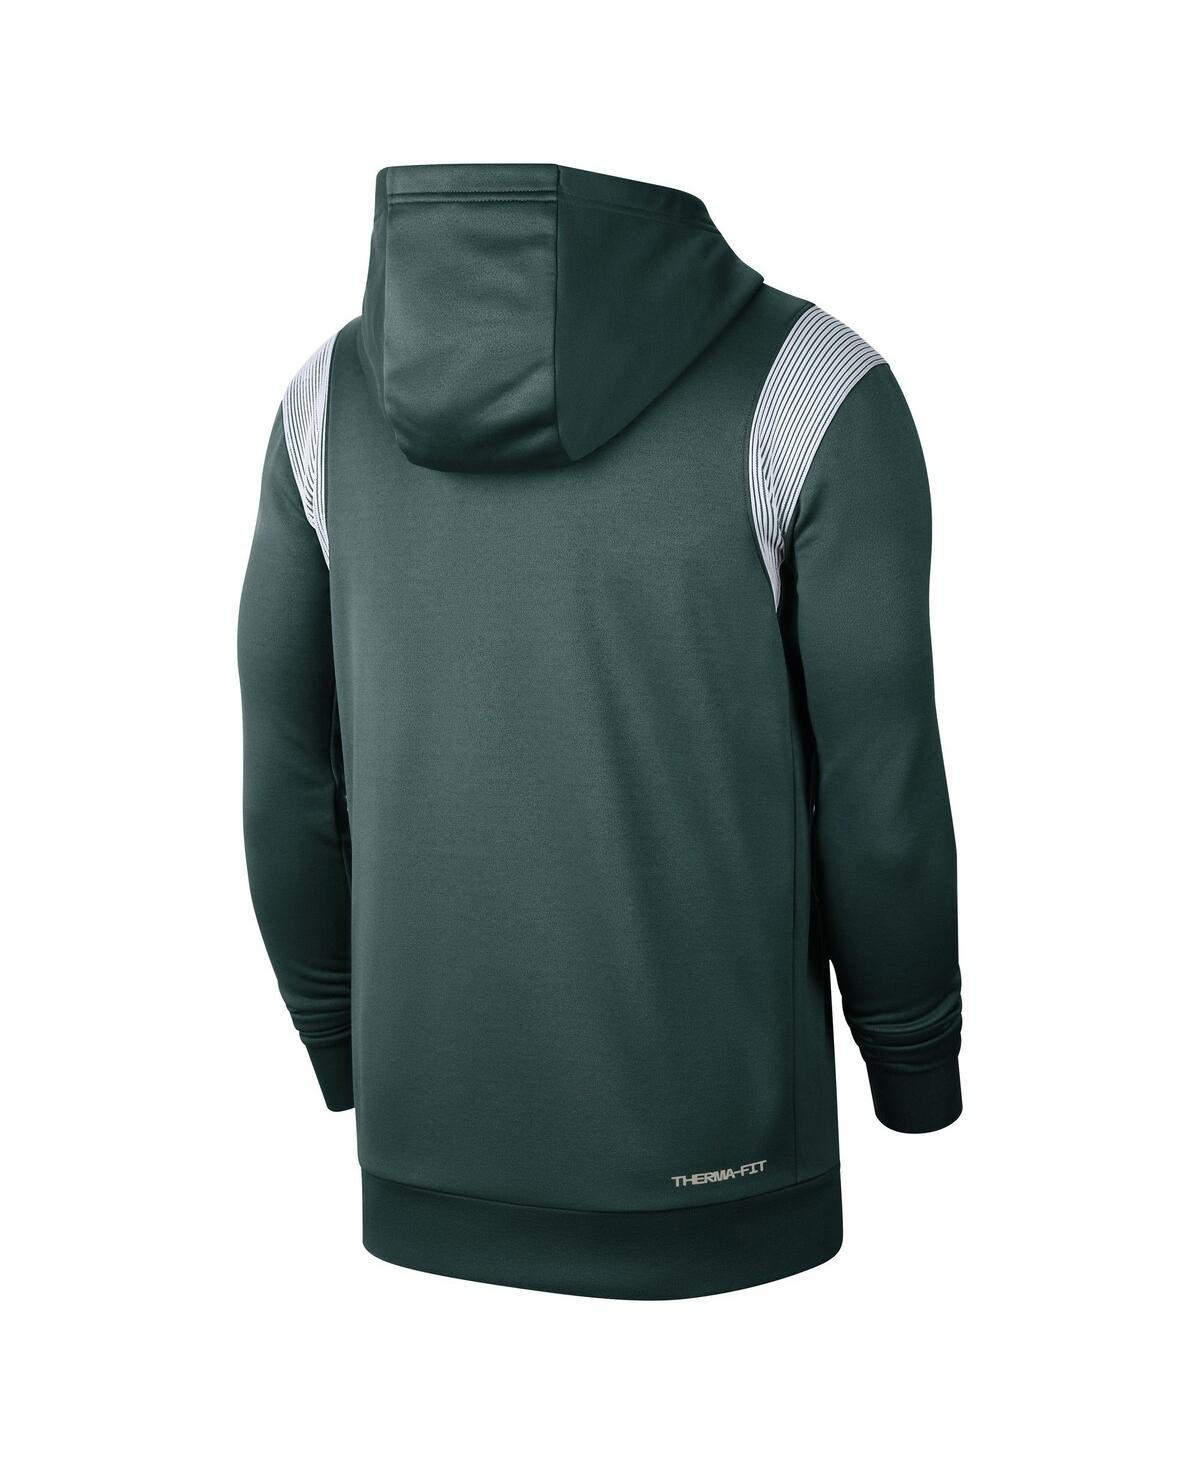 Shop Nike Men's  Green Michigan State Spartans 2022 Game Day Sideline Performance Pullover Hoodie